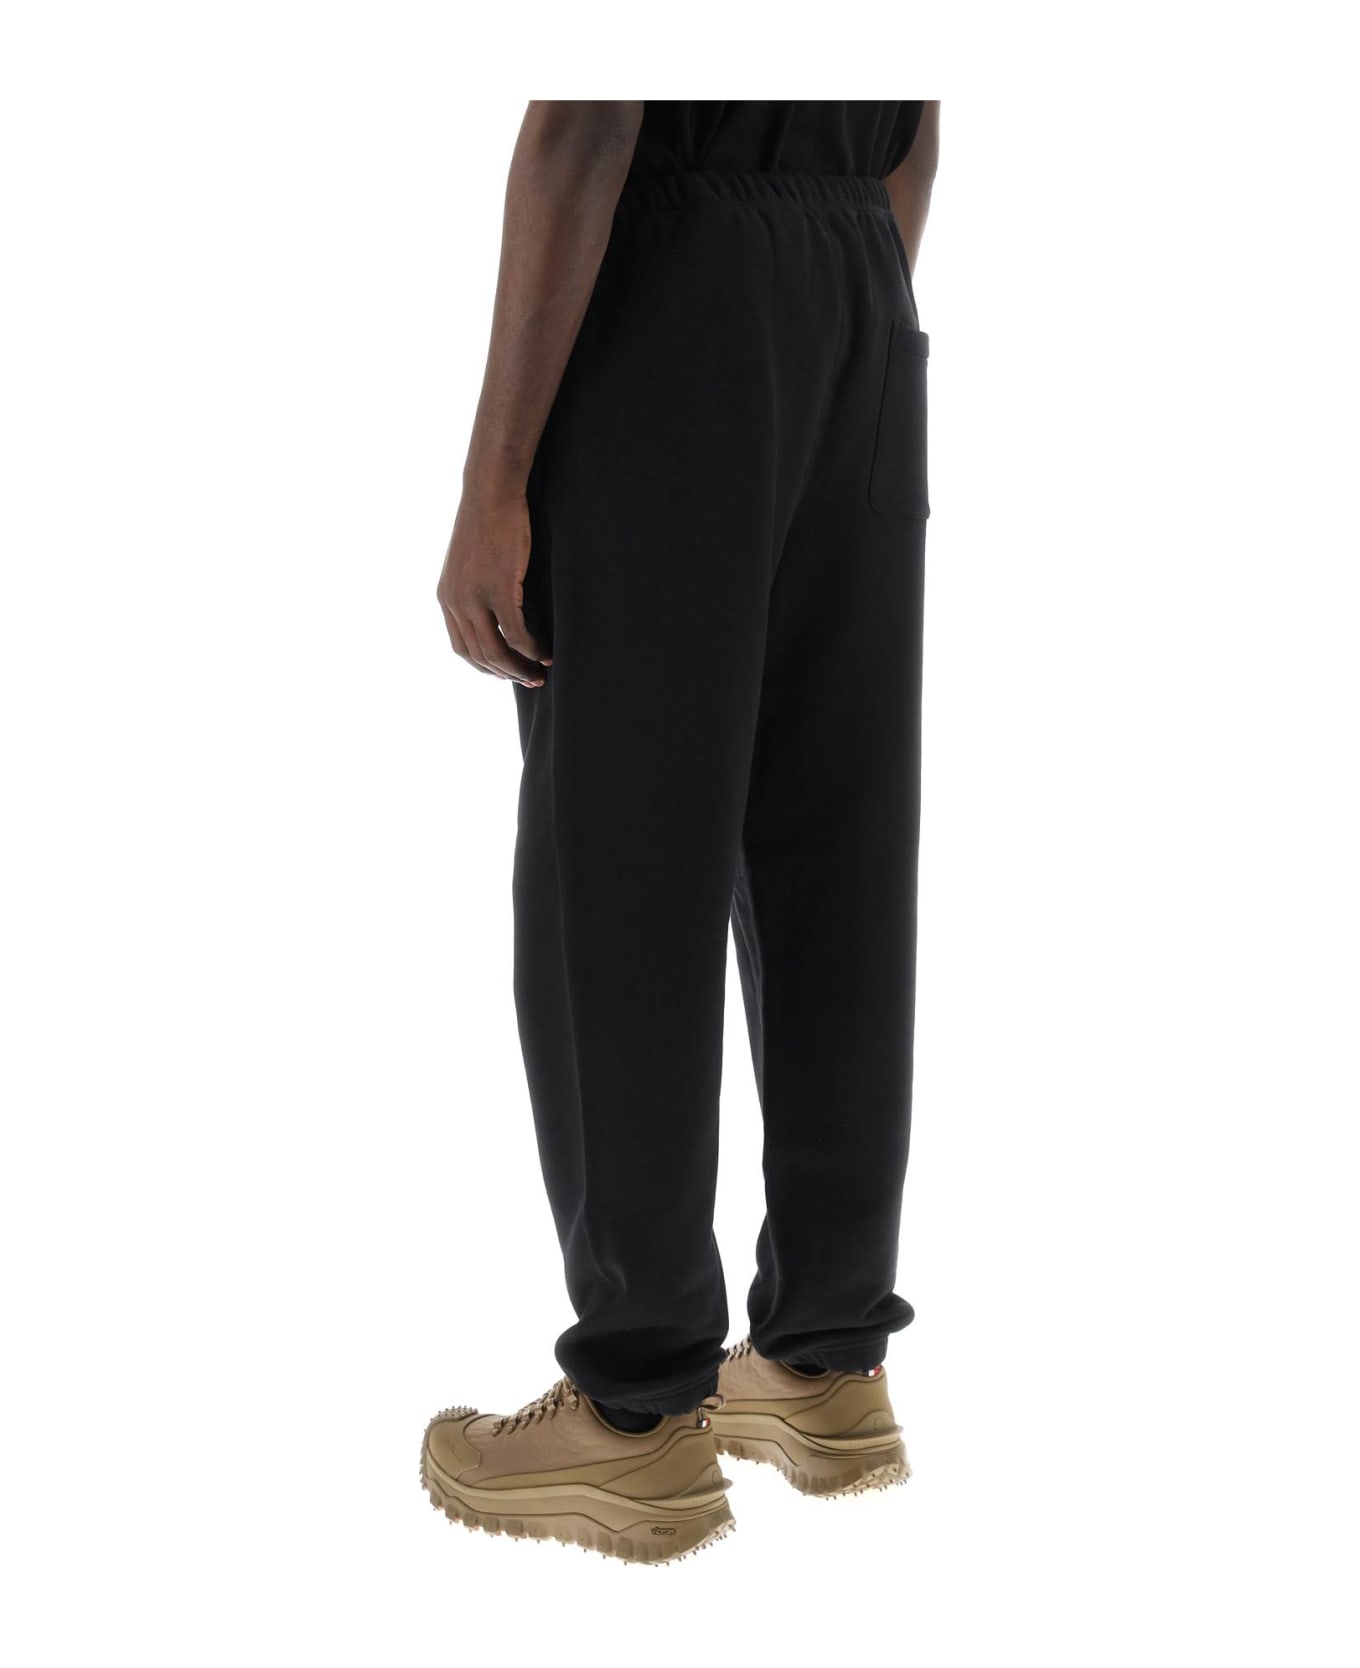 Moncler X Roc Nation Designed By Jay-z - Cotton Track-pants - black ボトムス